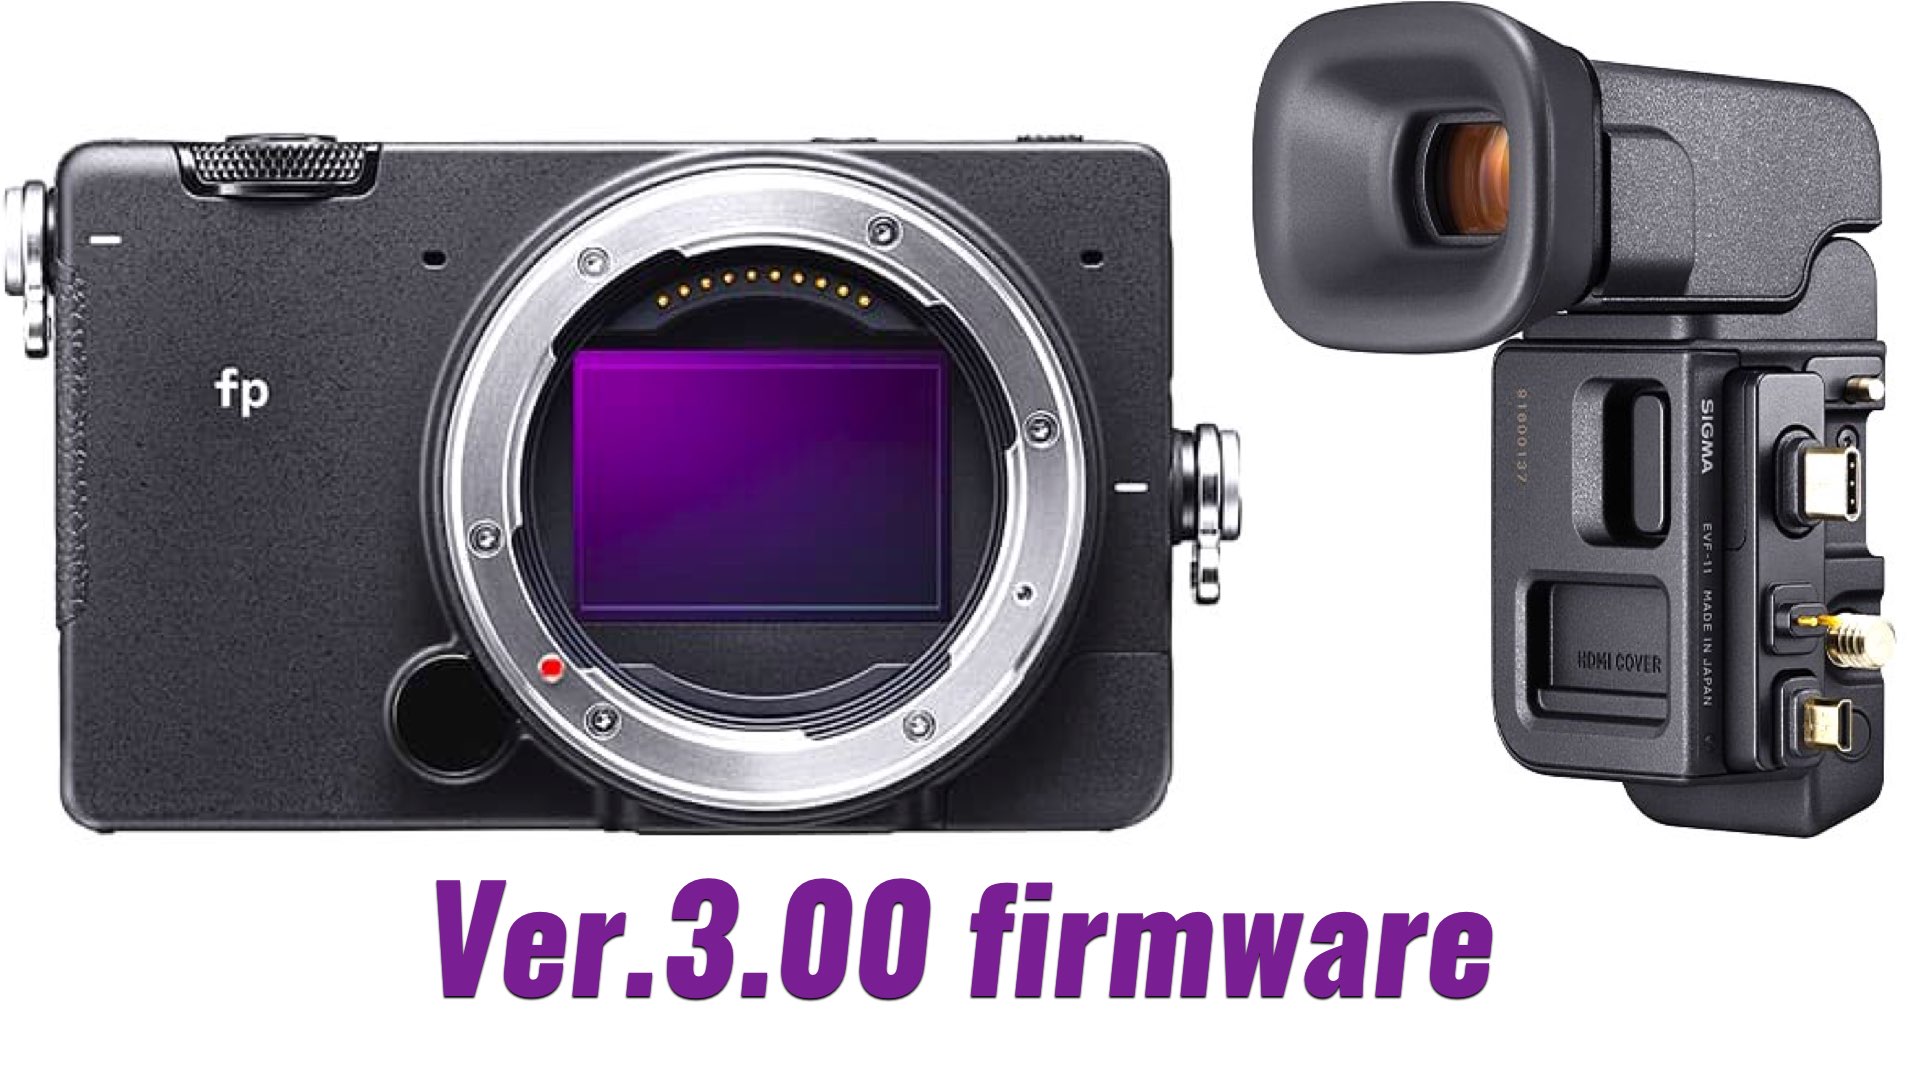 SIGMA Announced Ver.3.00 Firmware Update for its fp Compact Full-Frame Camera